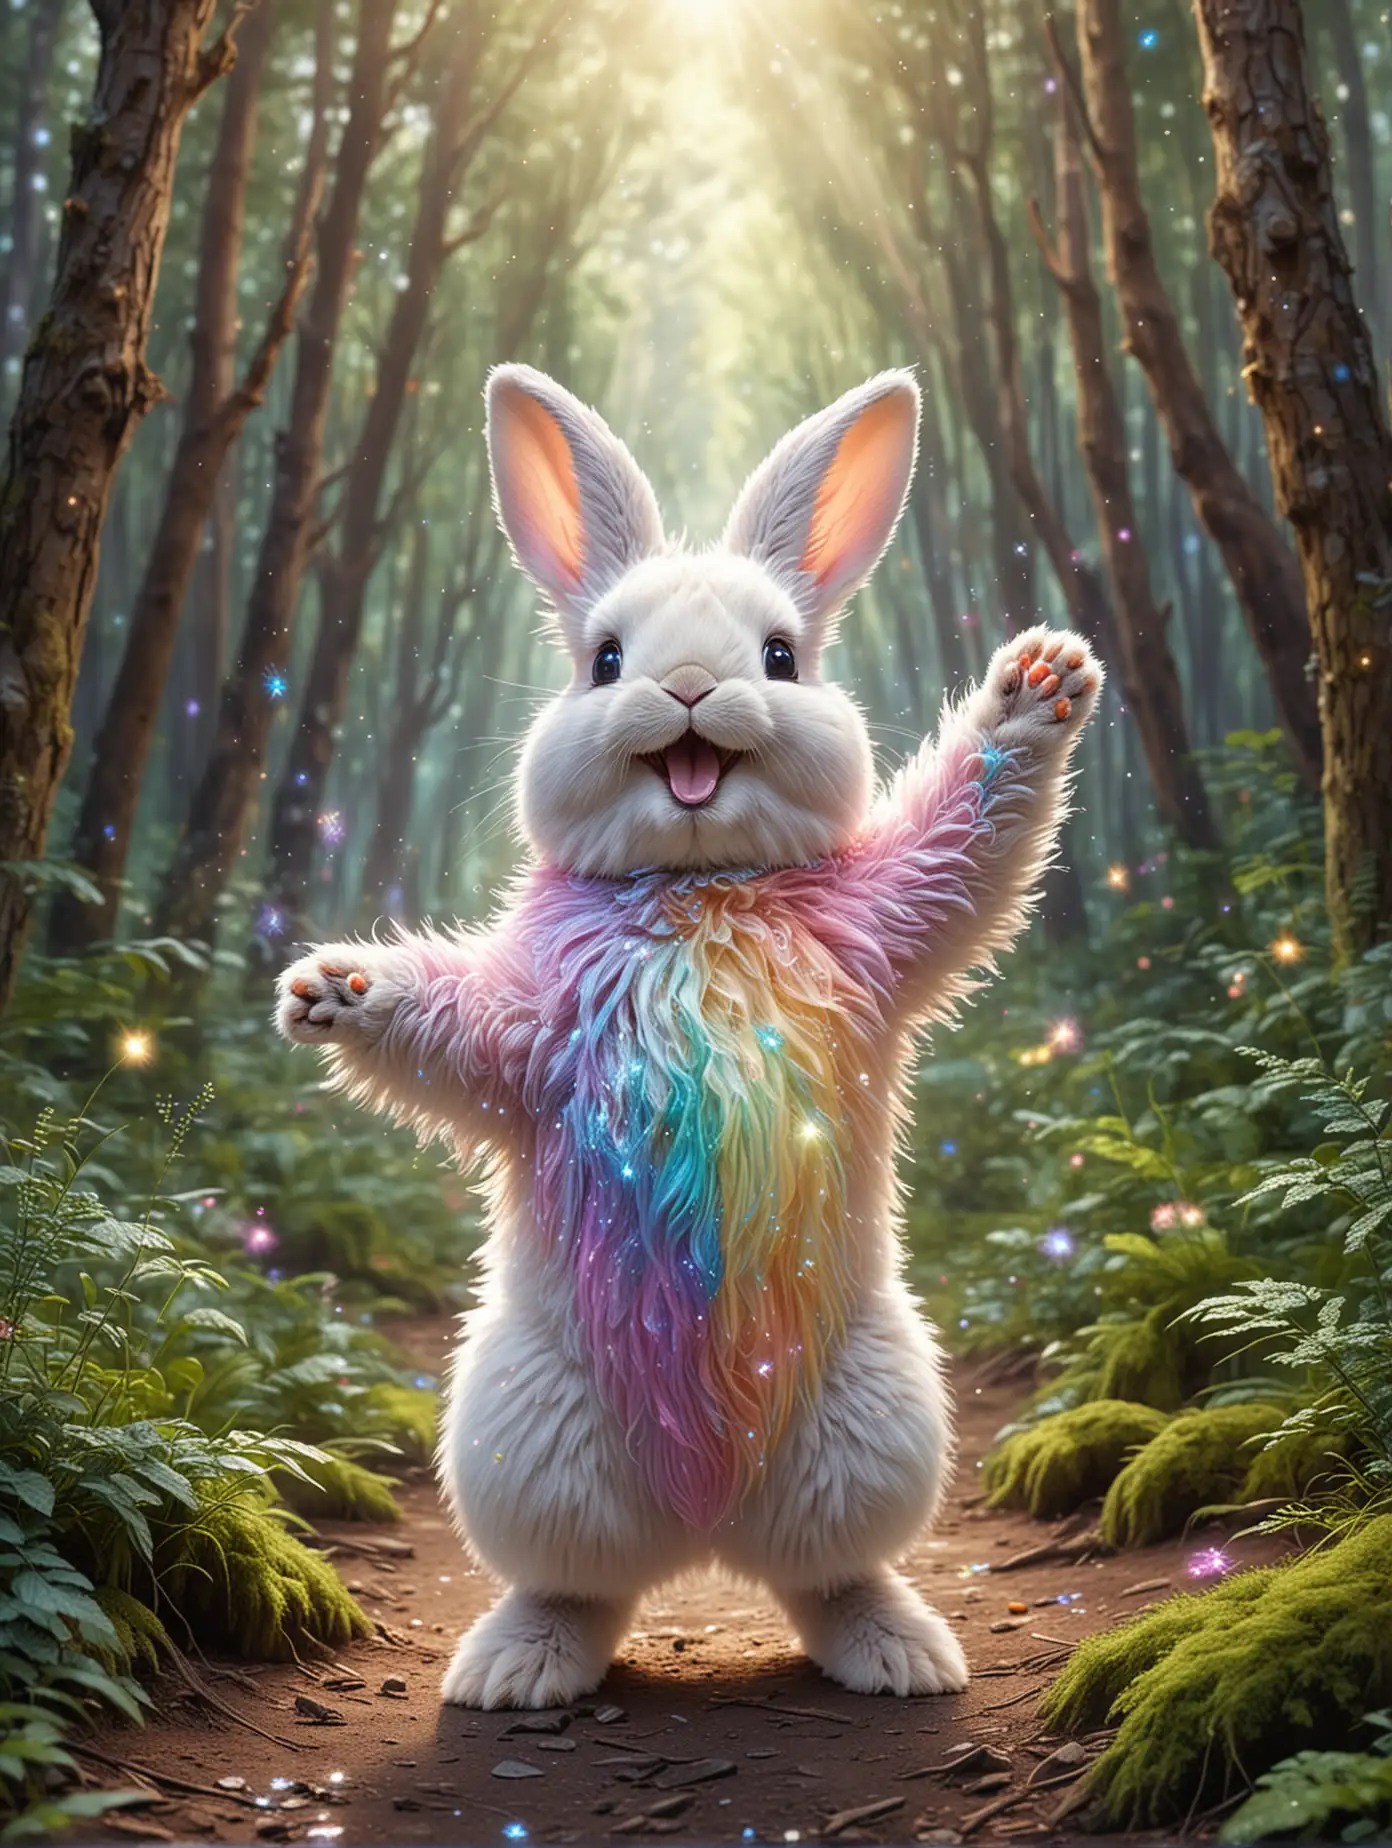 Smiling Bunny with Sparkly Fur in Peaceful Magical Forest